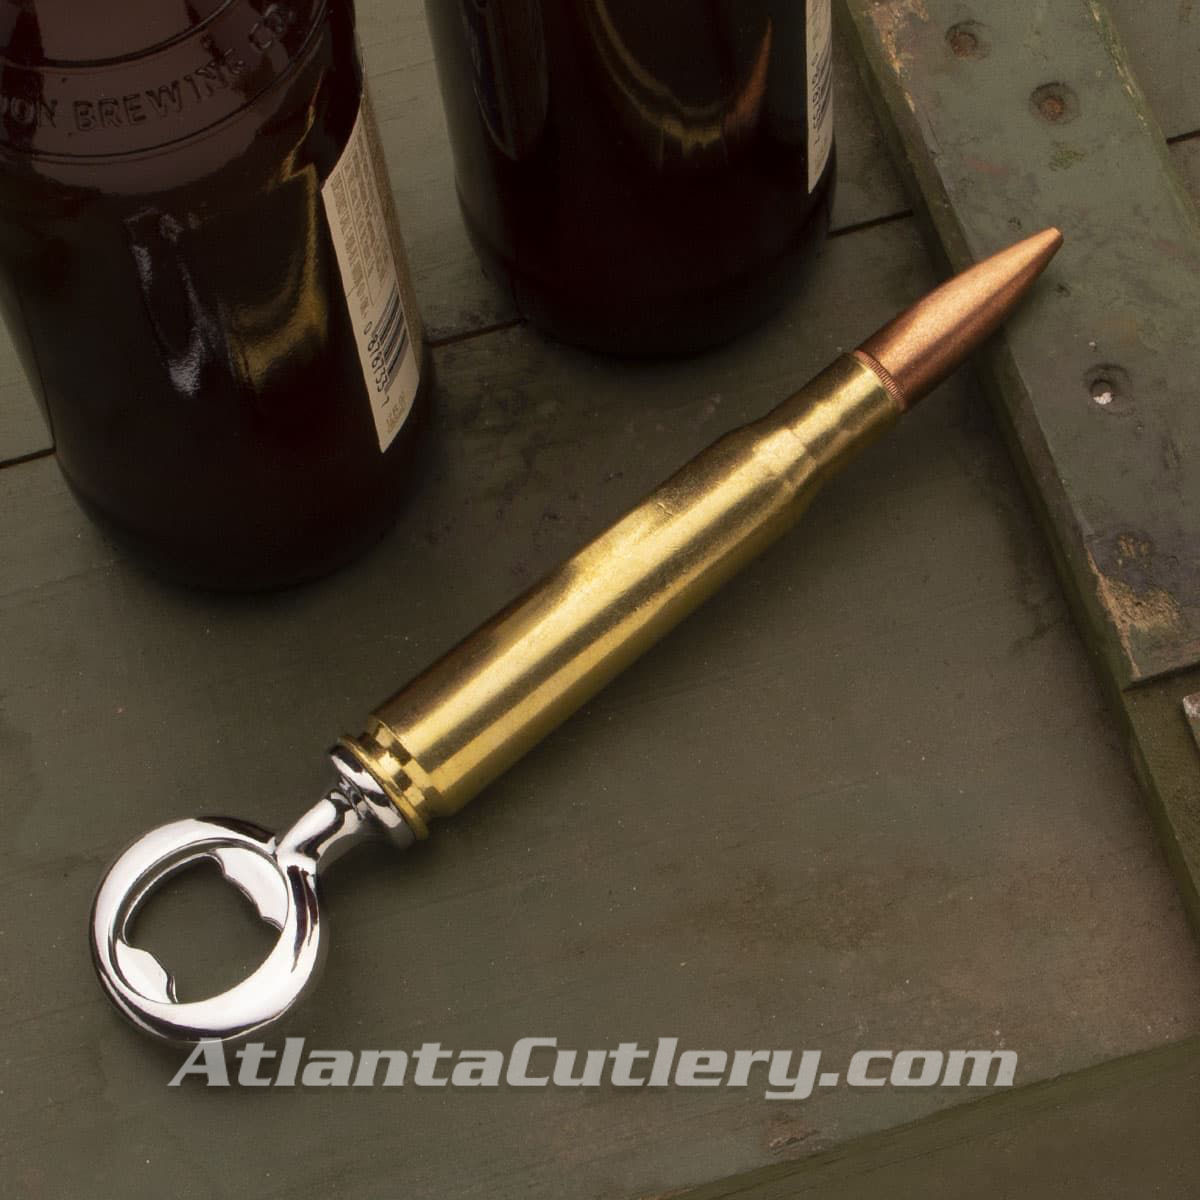 Made from a once-fired .50 caliber casing from US Department of Defense, this bullet bottle opener has a 5-1/2" shell casing 